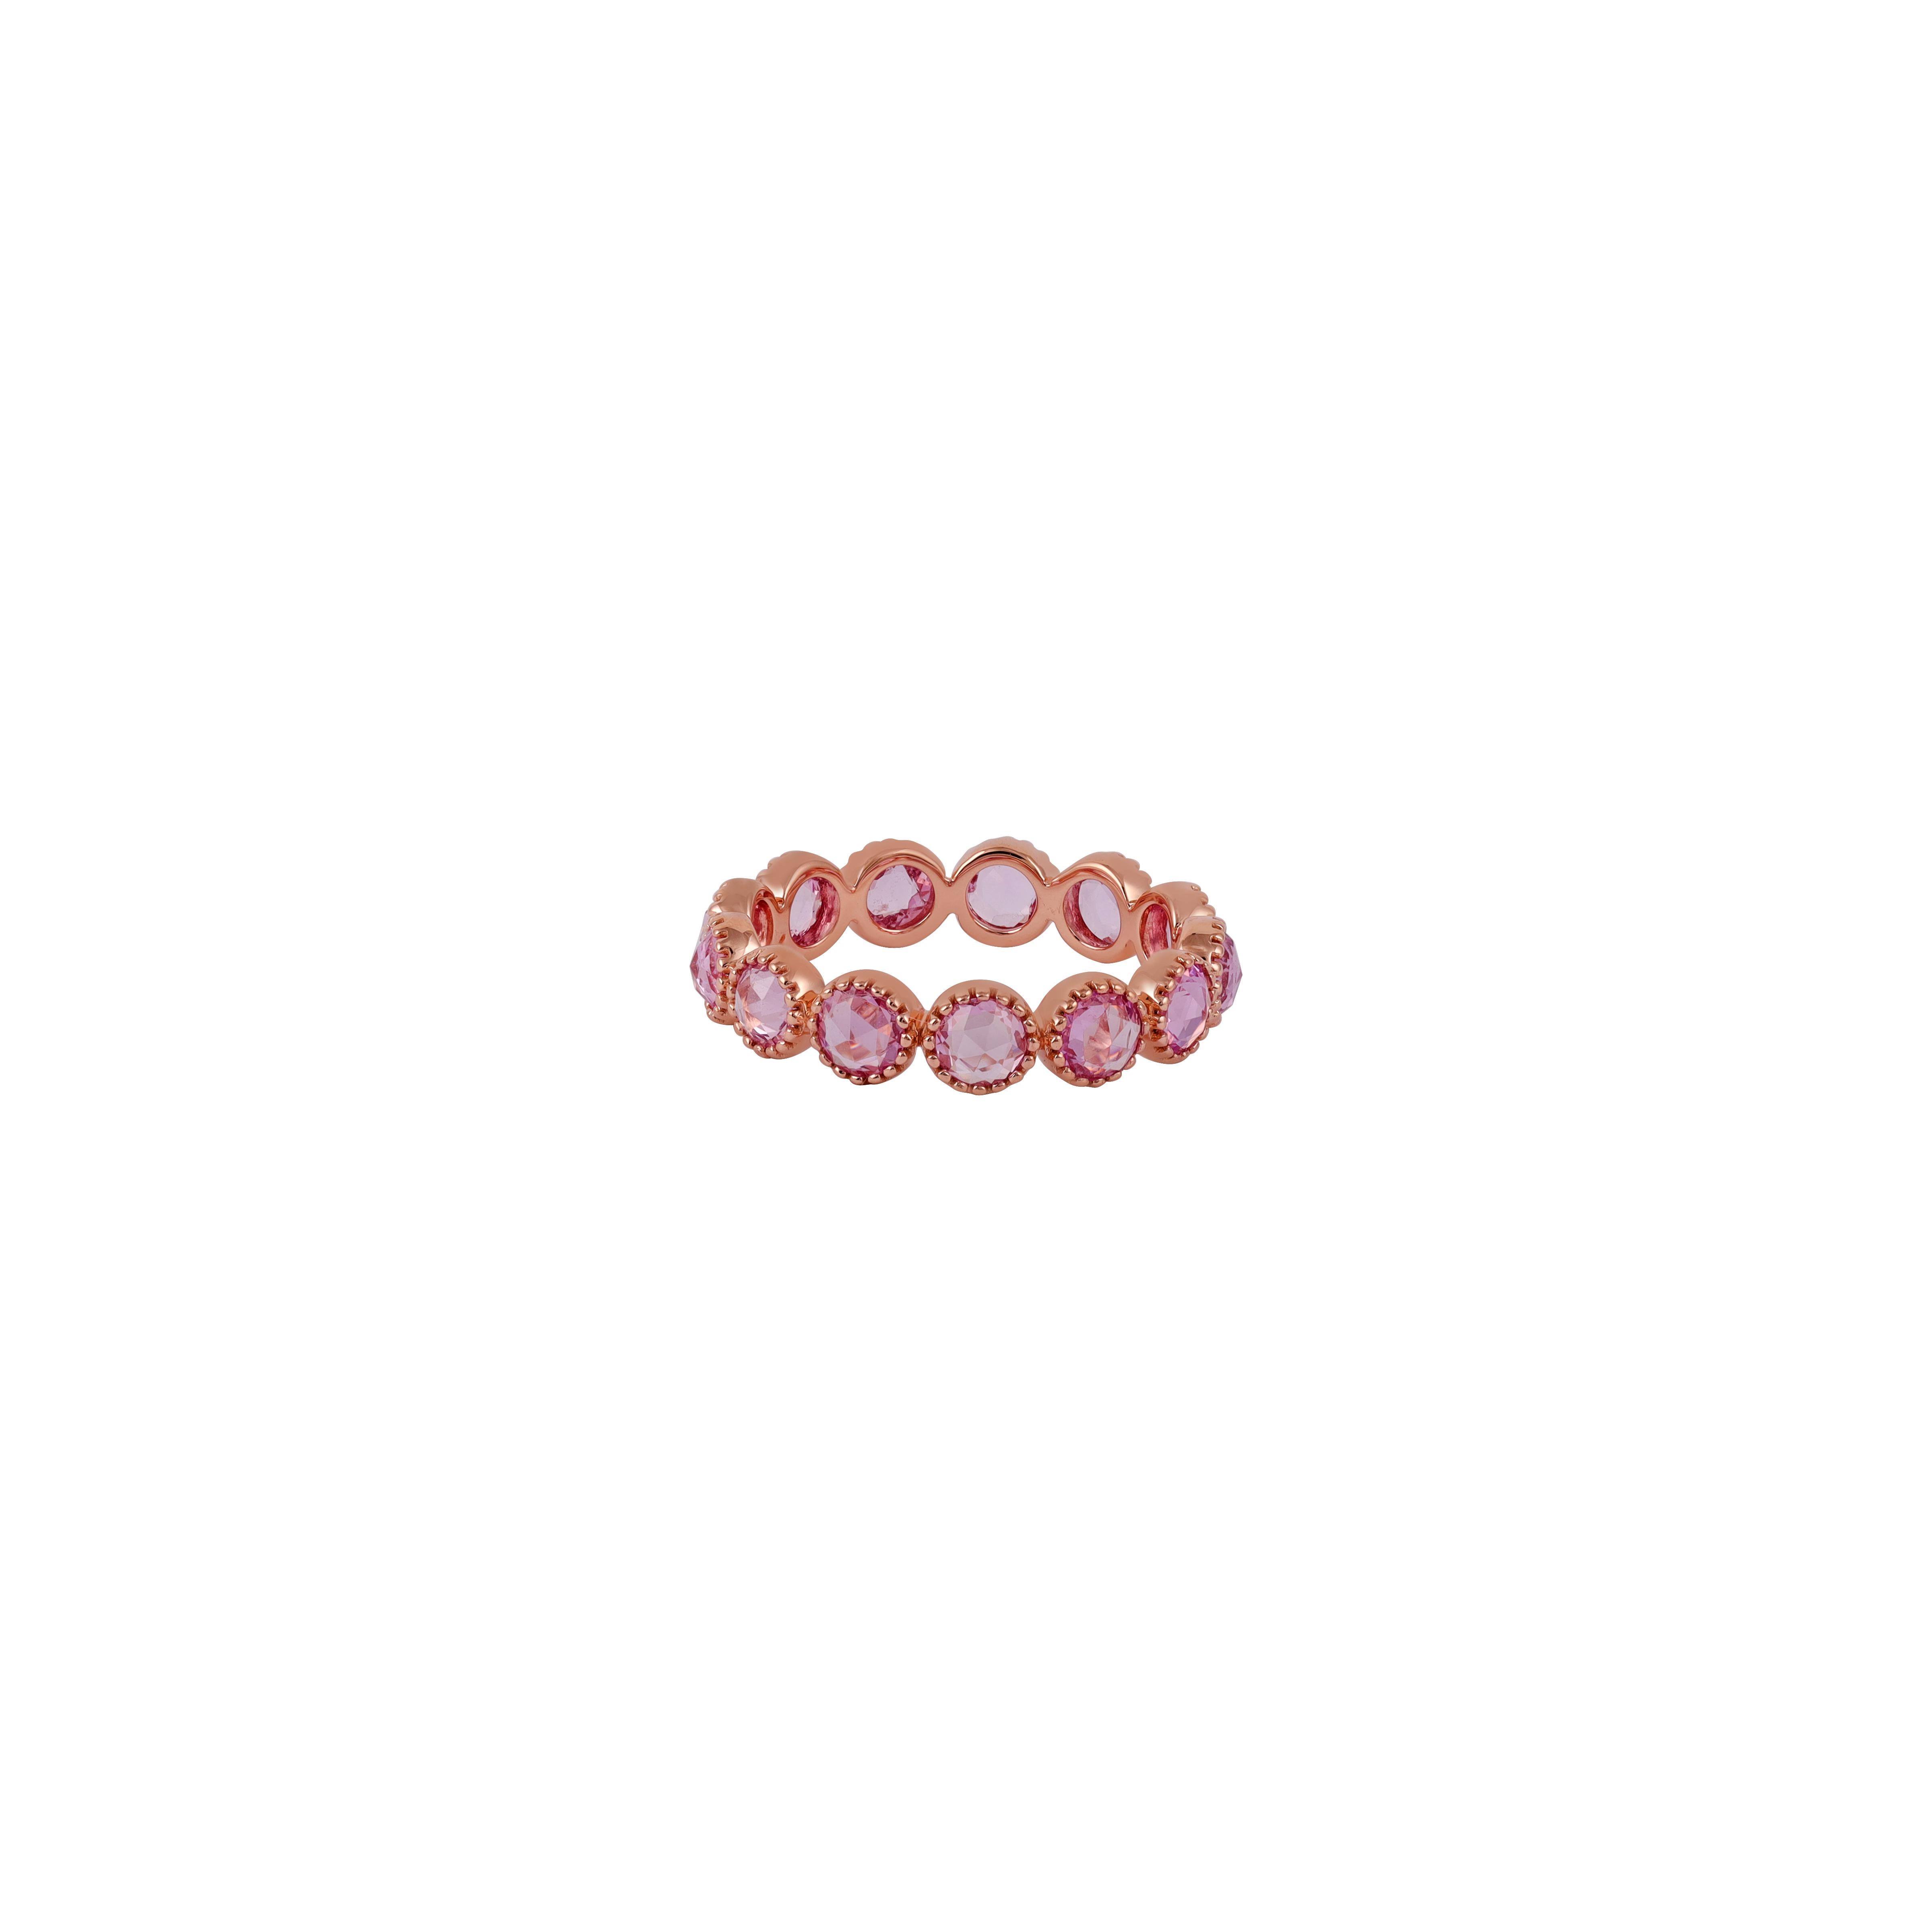 Handcrafted Round Sapphire Band
13 Round Sapphire - 2.51 Cts
18 Karat Rose Gold - 2.67 Grams


Custom Services
Resizing is available.
Request Customization